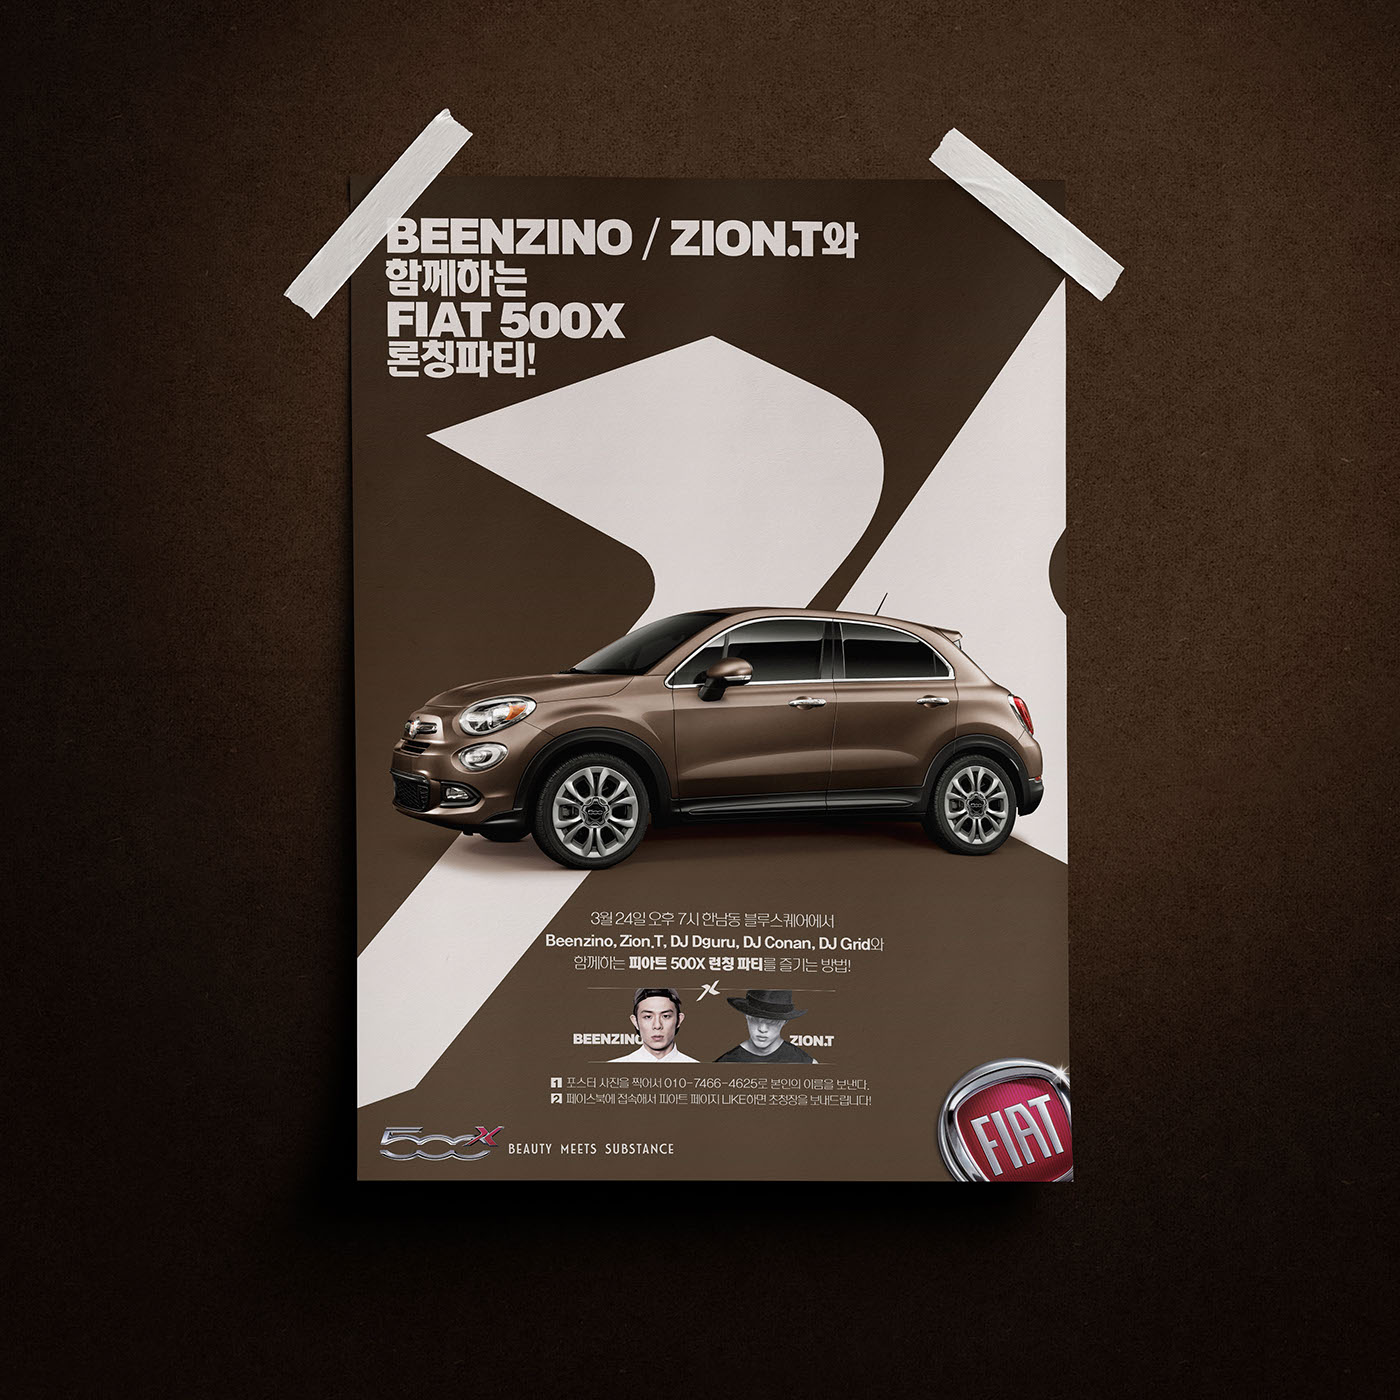 ad Advertising  Launching poster print fiat car graphic ILLUSTRATION  information design